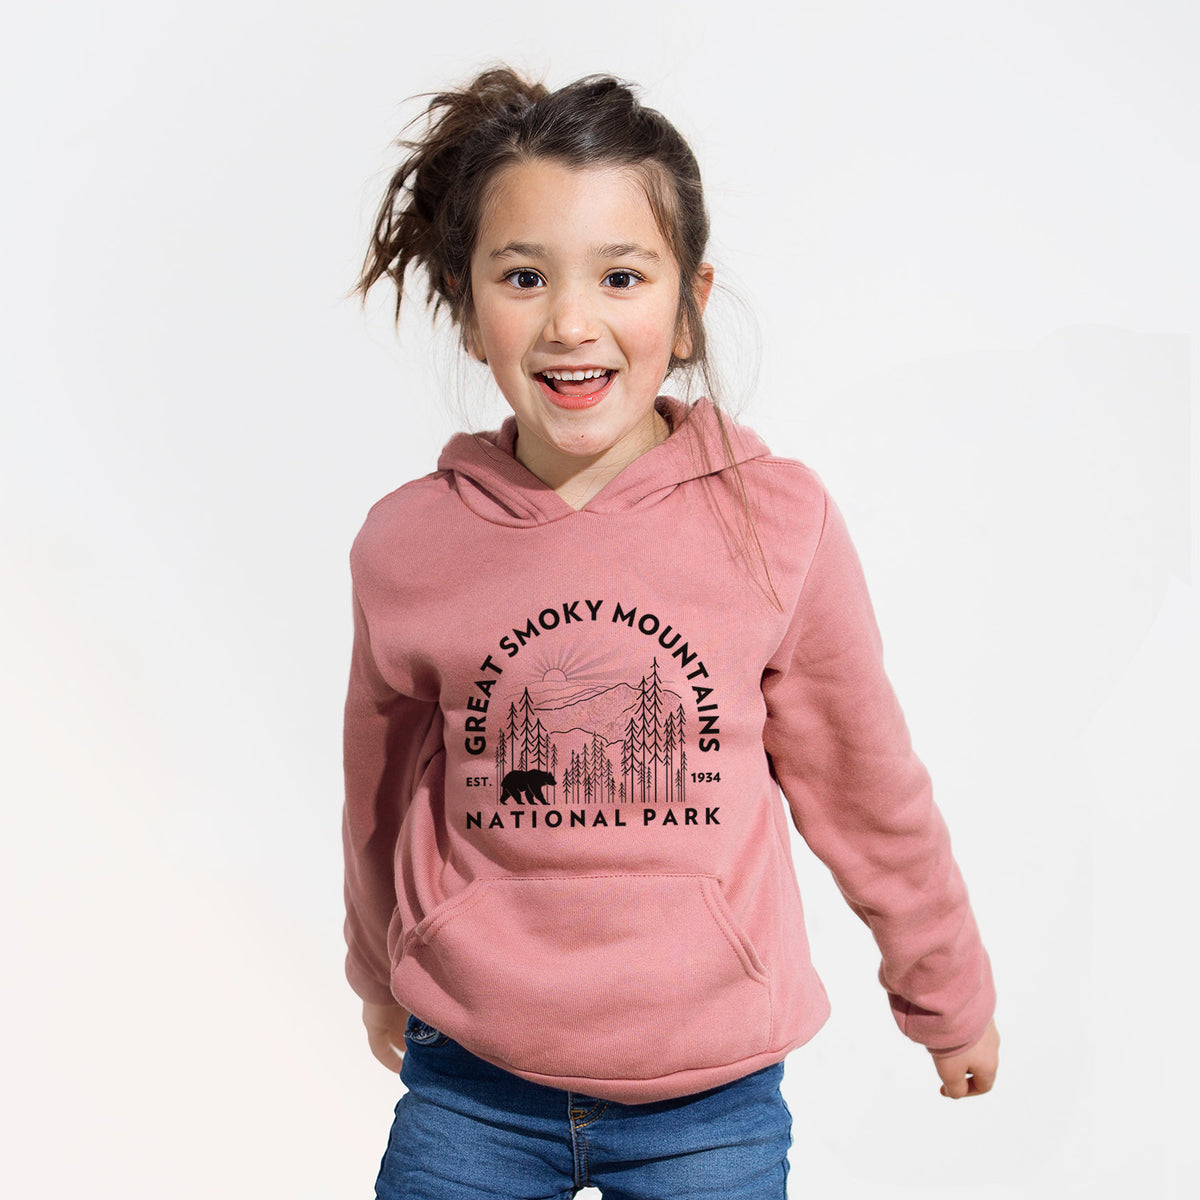 Great Smoky Mountains National Park - Youth Hoodie Sweatshirt